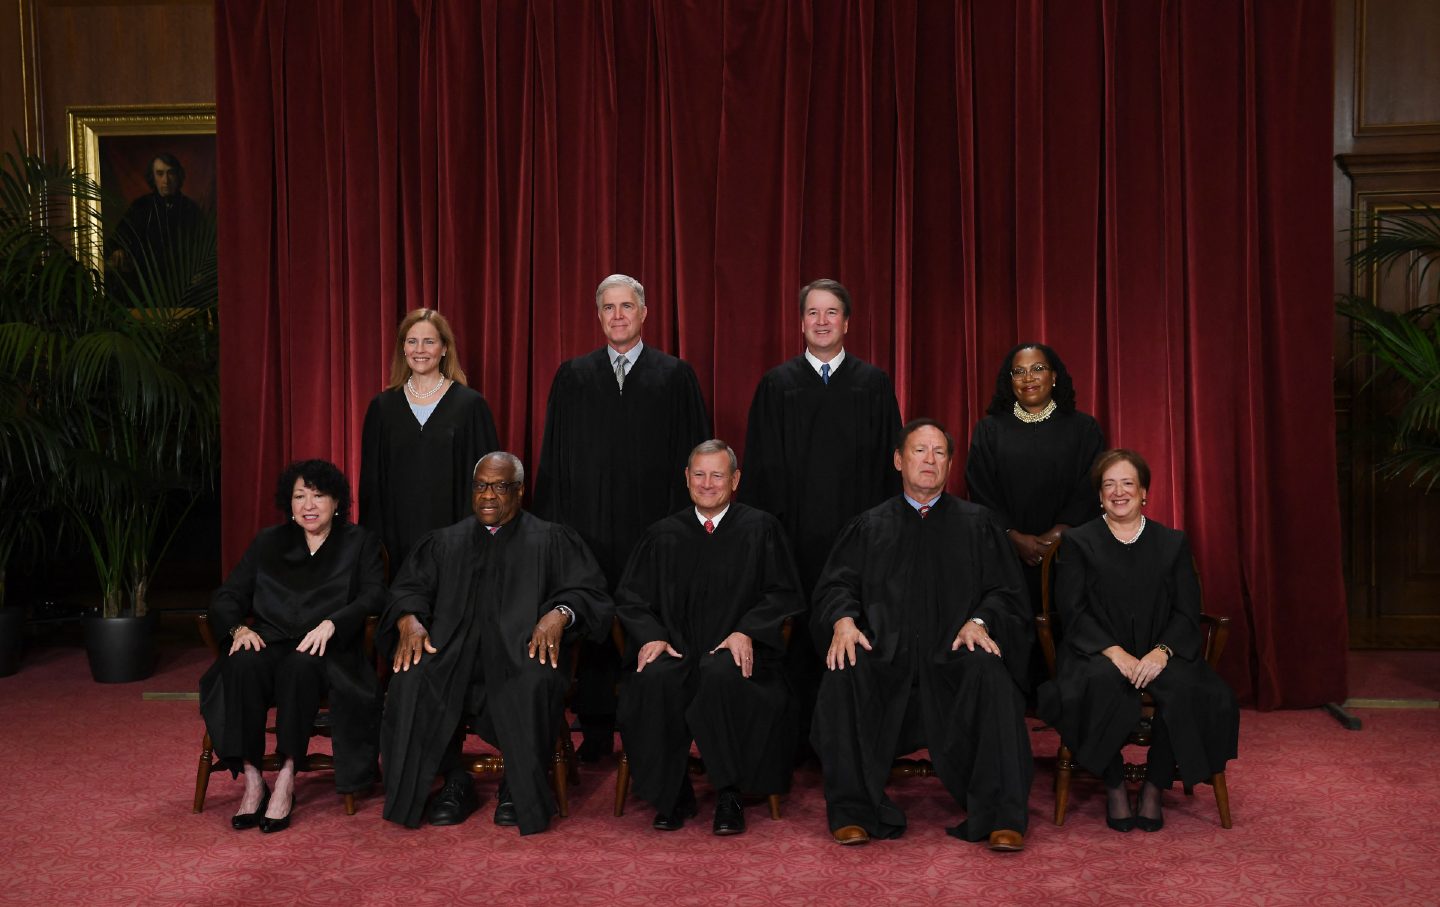 Justices of the US Supreme Court pose for their official photo at the Supreme Court Bulding in Washington, D.C., on October 7, 2022.